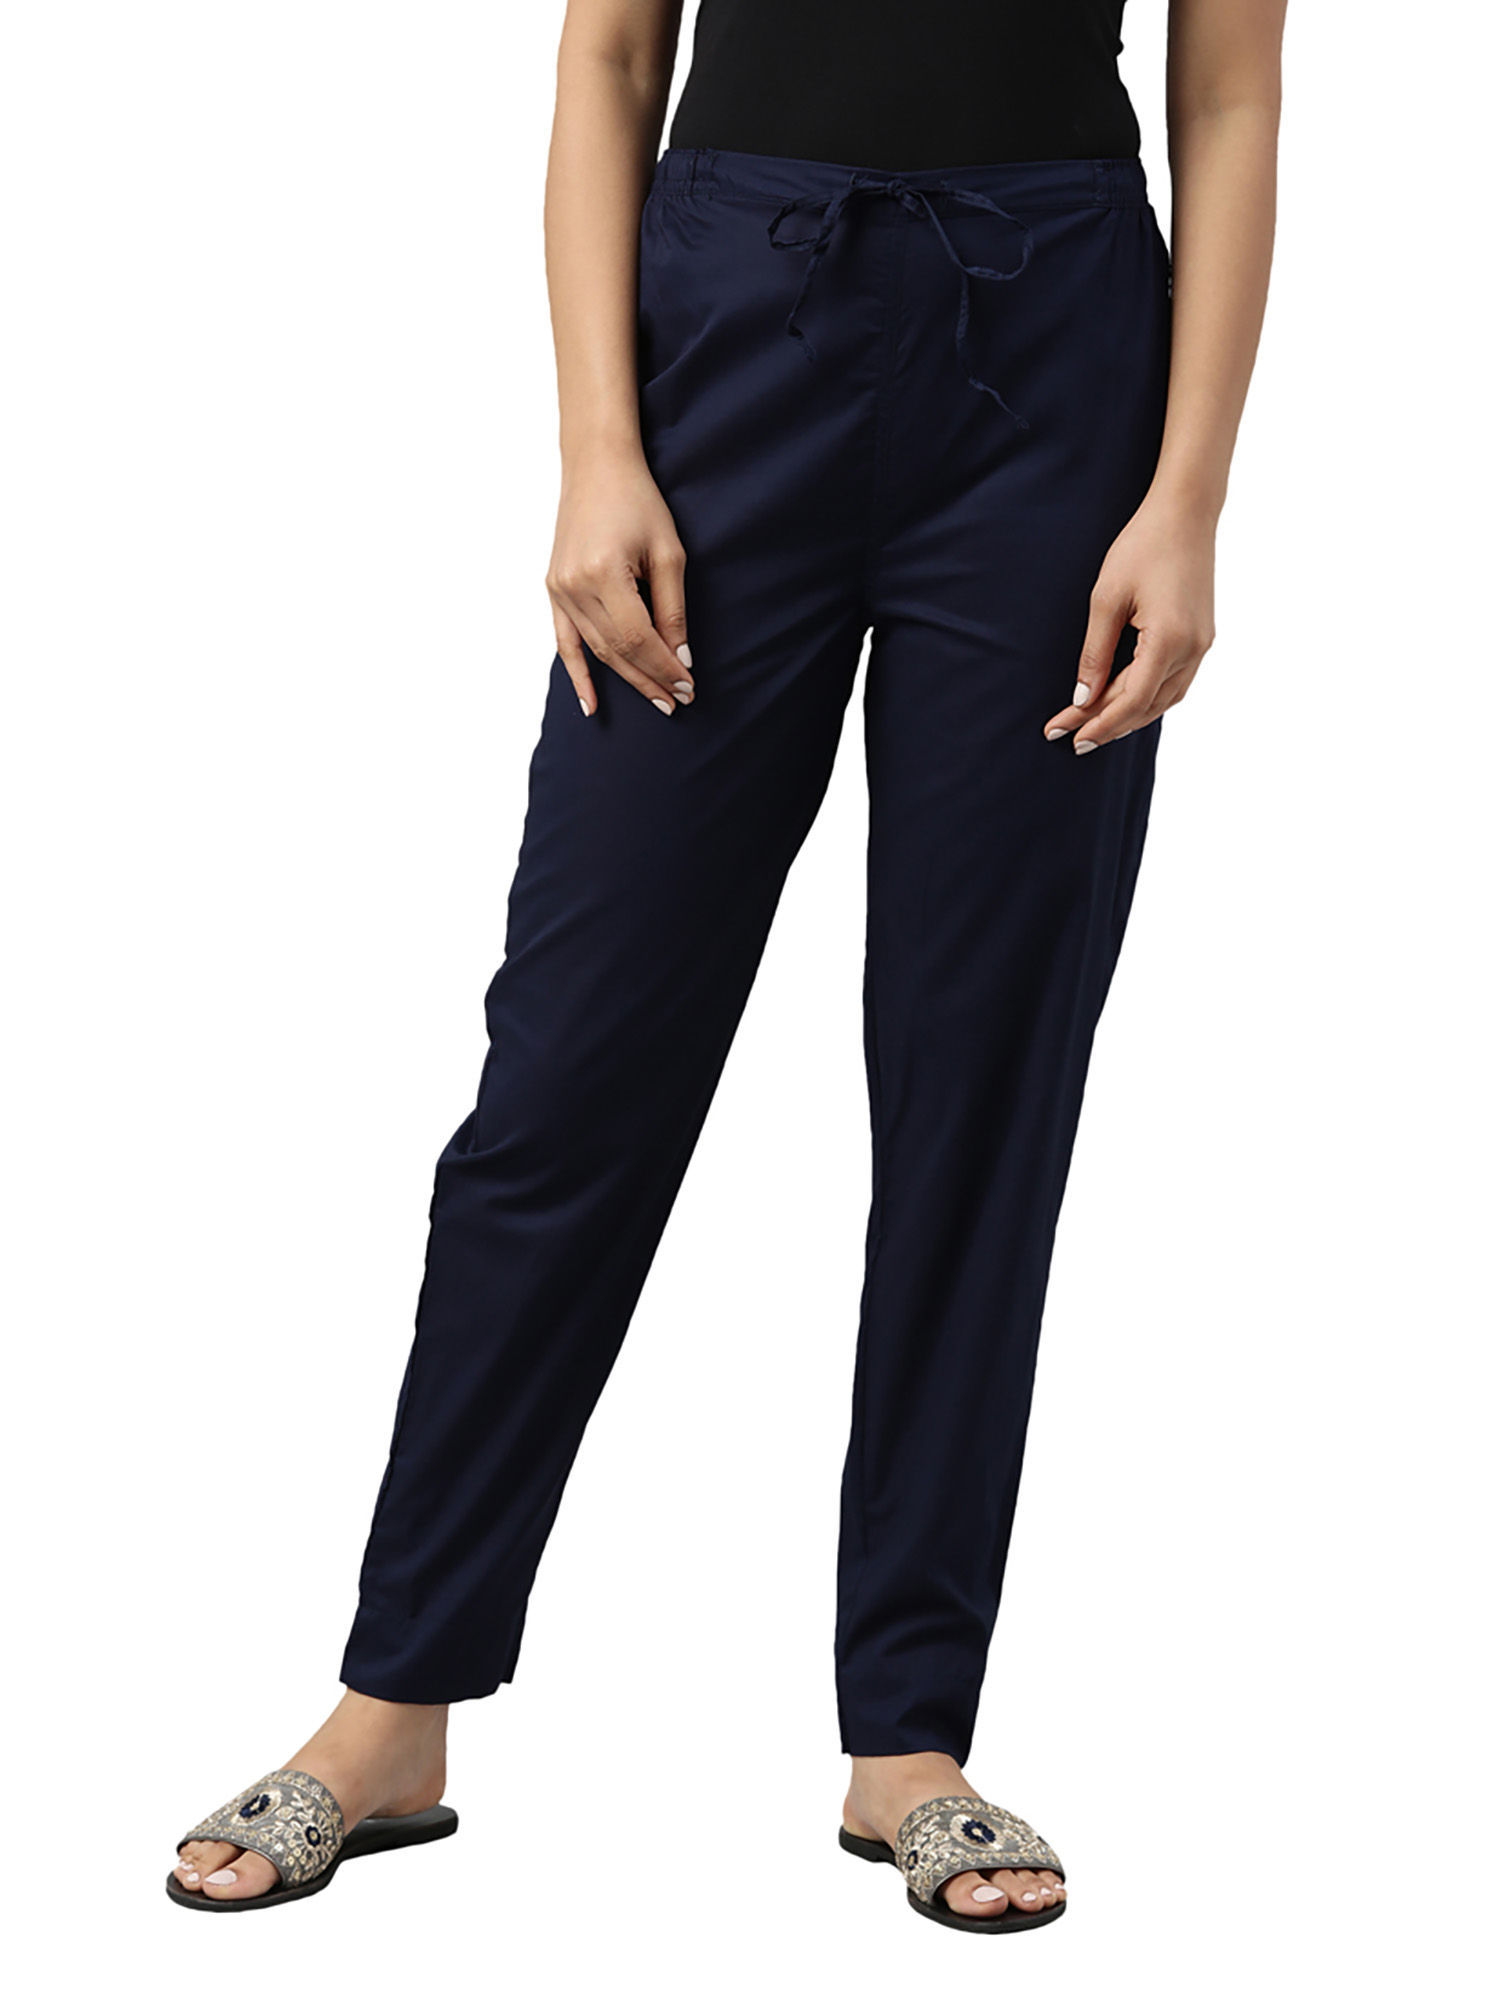 Naariy Navy Blue Stretchable Cotton Pants for Women  Everyday Wear